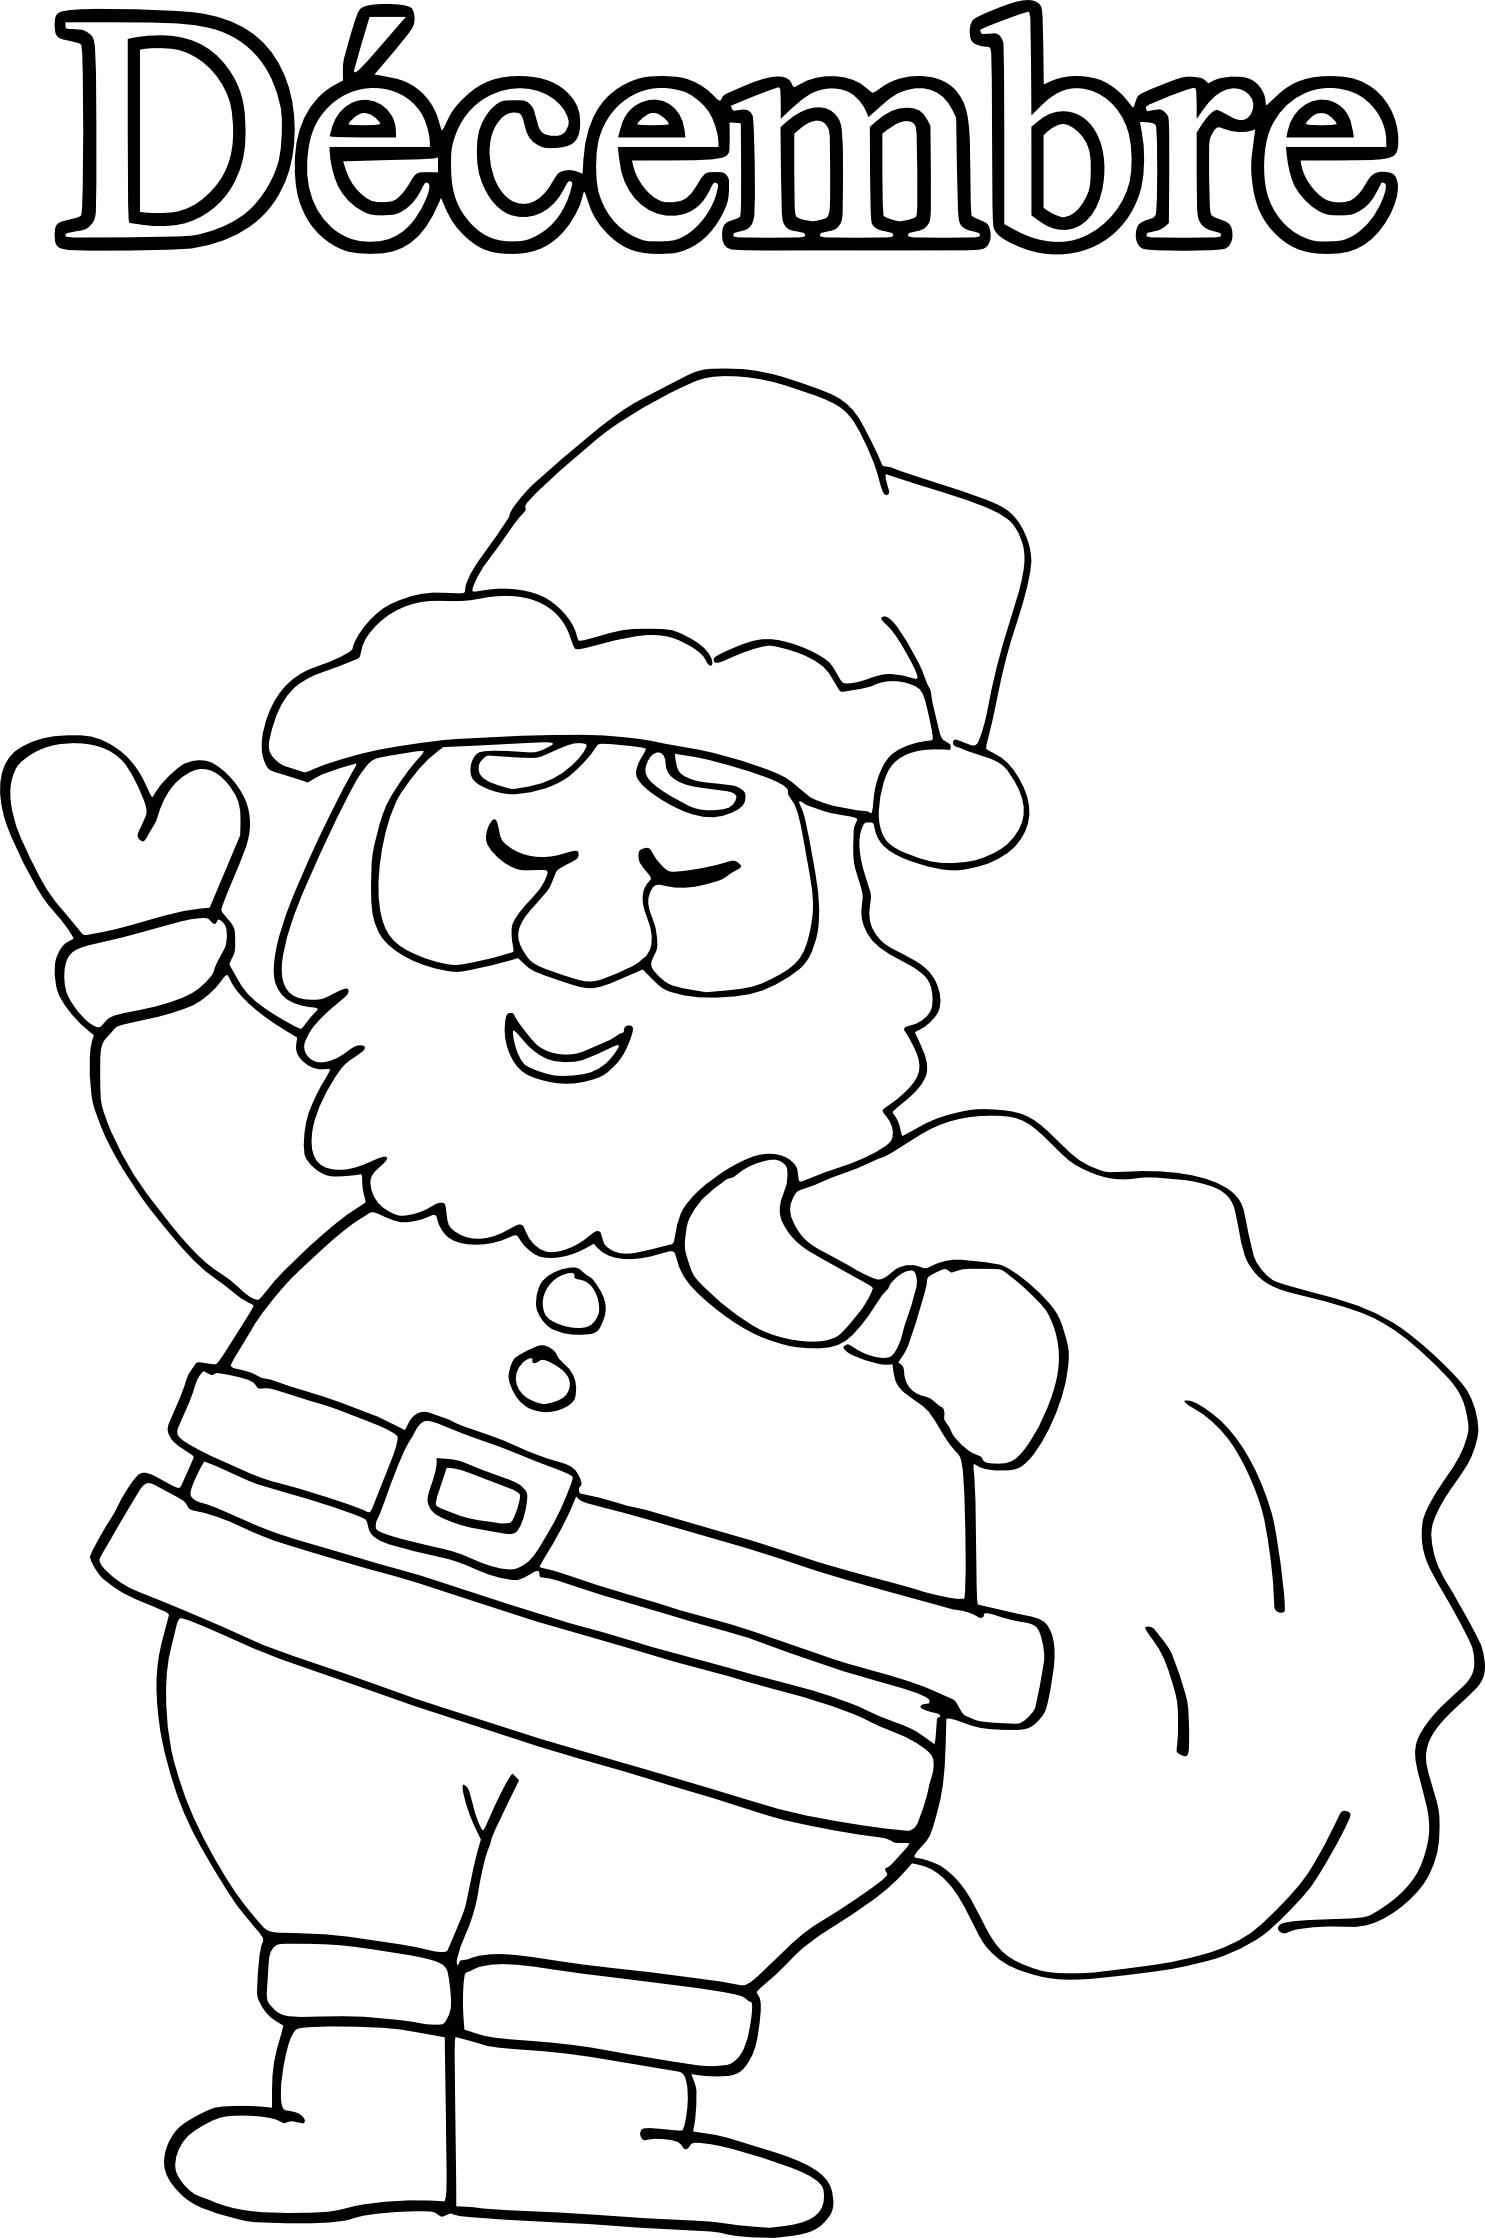 December coloring page 2